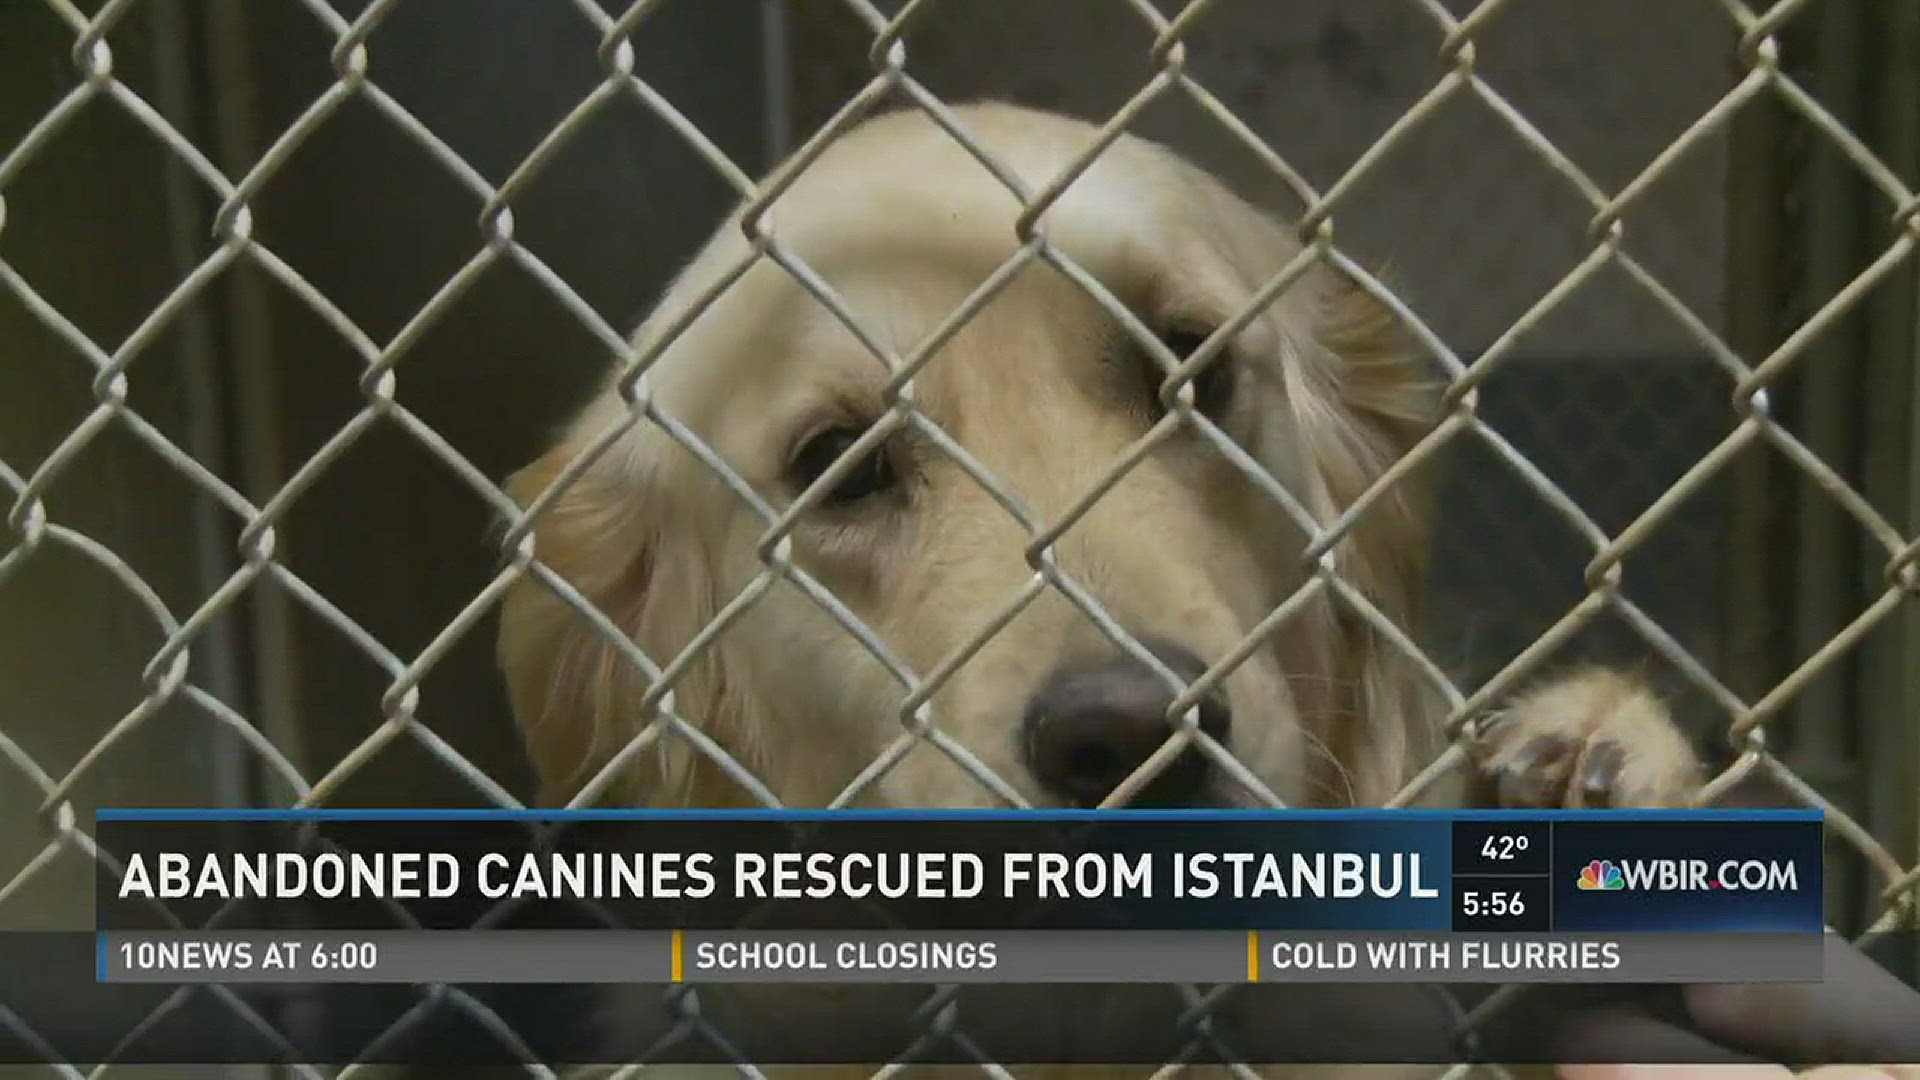 The golden retrievers were rescued from Istanbul. They will be adopted in East Tennessee. This latest group has UT-inspired names, including Peyton.